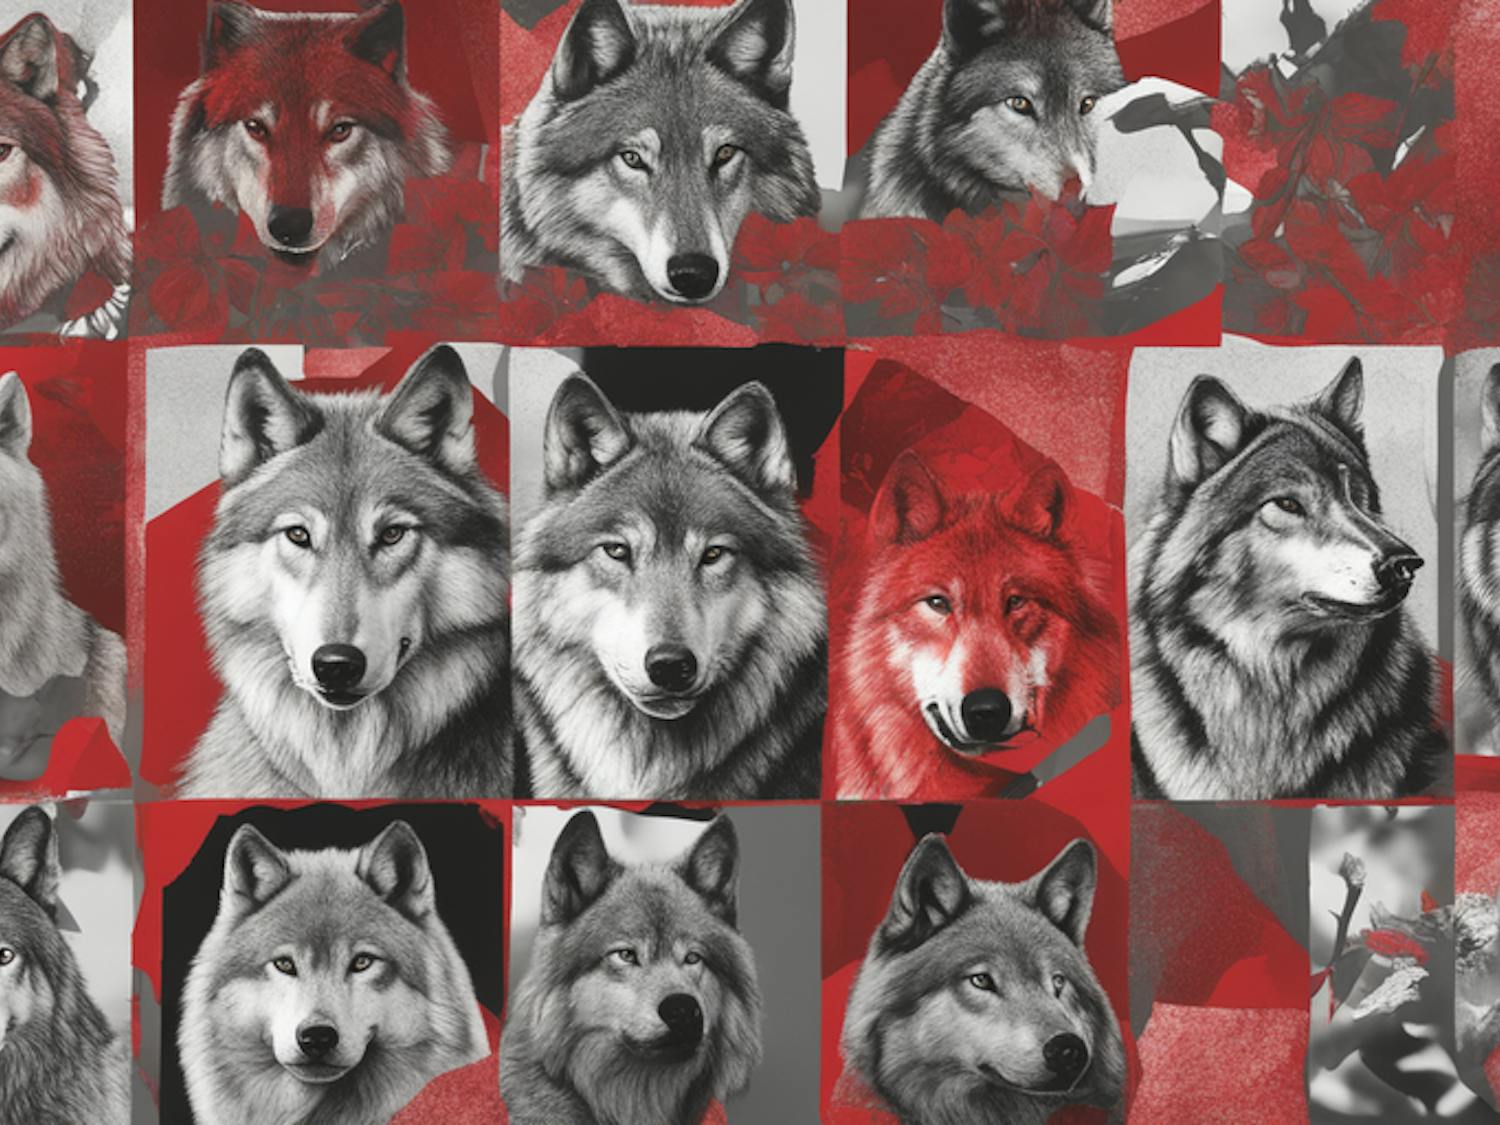 new-mexico-lobos-wolf-cherry-redsilver-classes-professors-ai-students-collage-unm-people-590927887.png